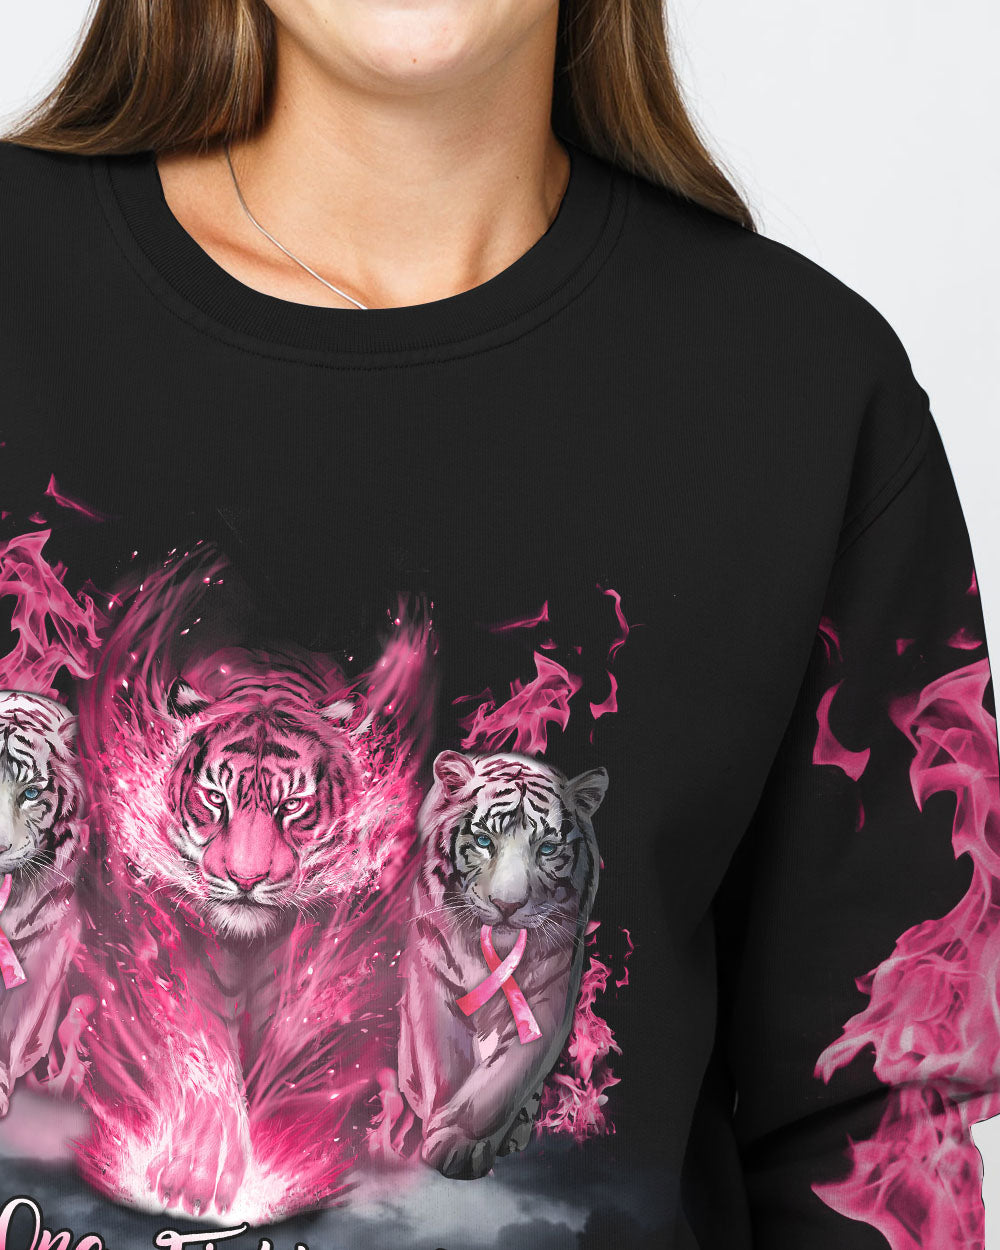 No One Fights Alone Pink Tiger Women's Breast Cancer Awareness Sweatshirt